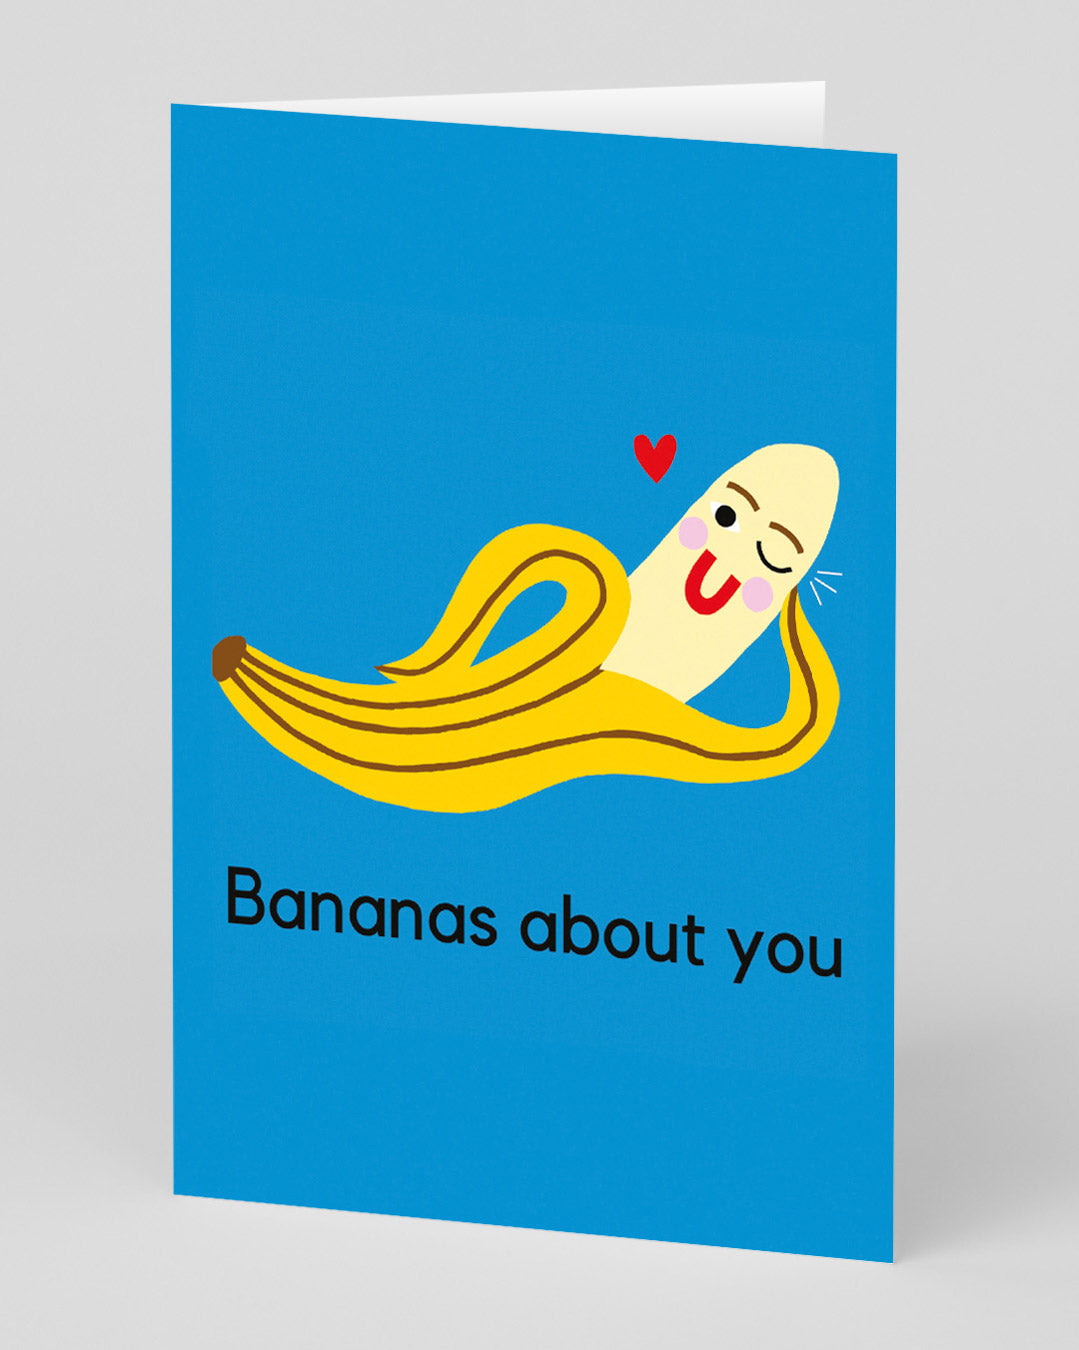 Valentine’s Day | Funny Valentines Card For Him or Her | Personalised Bananas About You Valentine’s Card | Ohh Deer Unique Valentine’s Card | Artwork by Ohh Deer | Made In The UK, Eco-Friendly Materials, Plastic Free Packaging